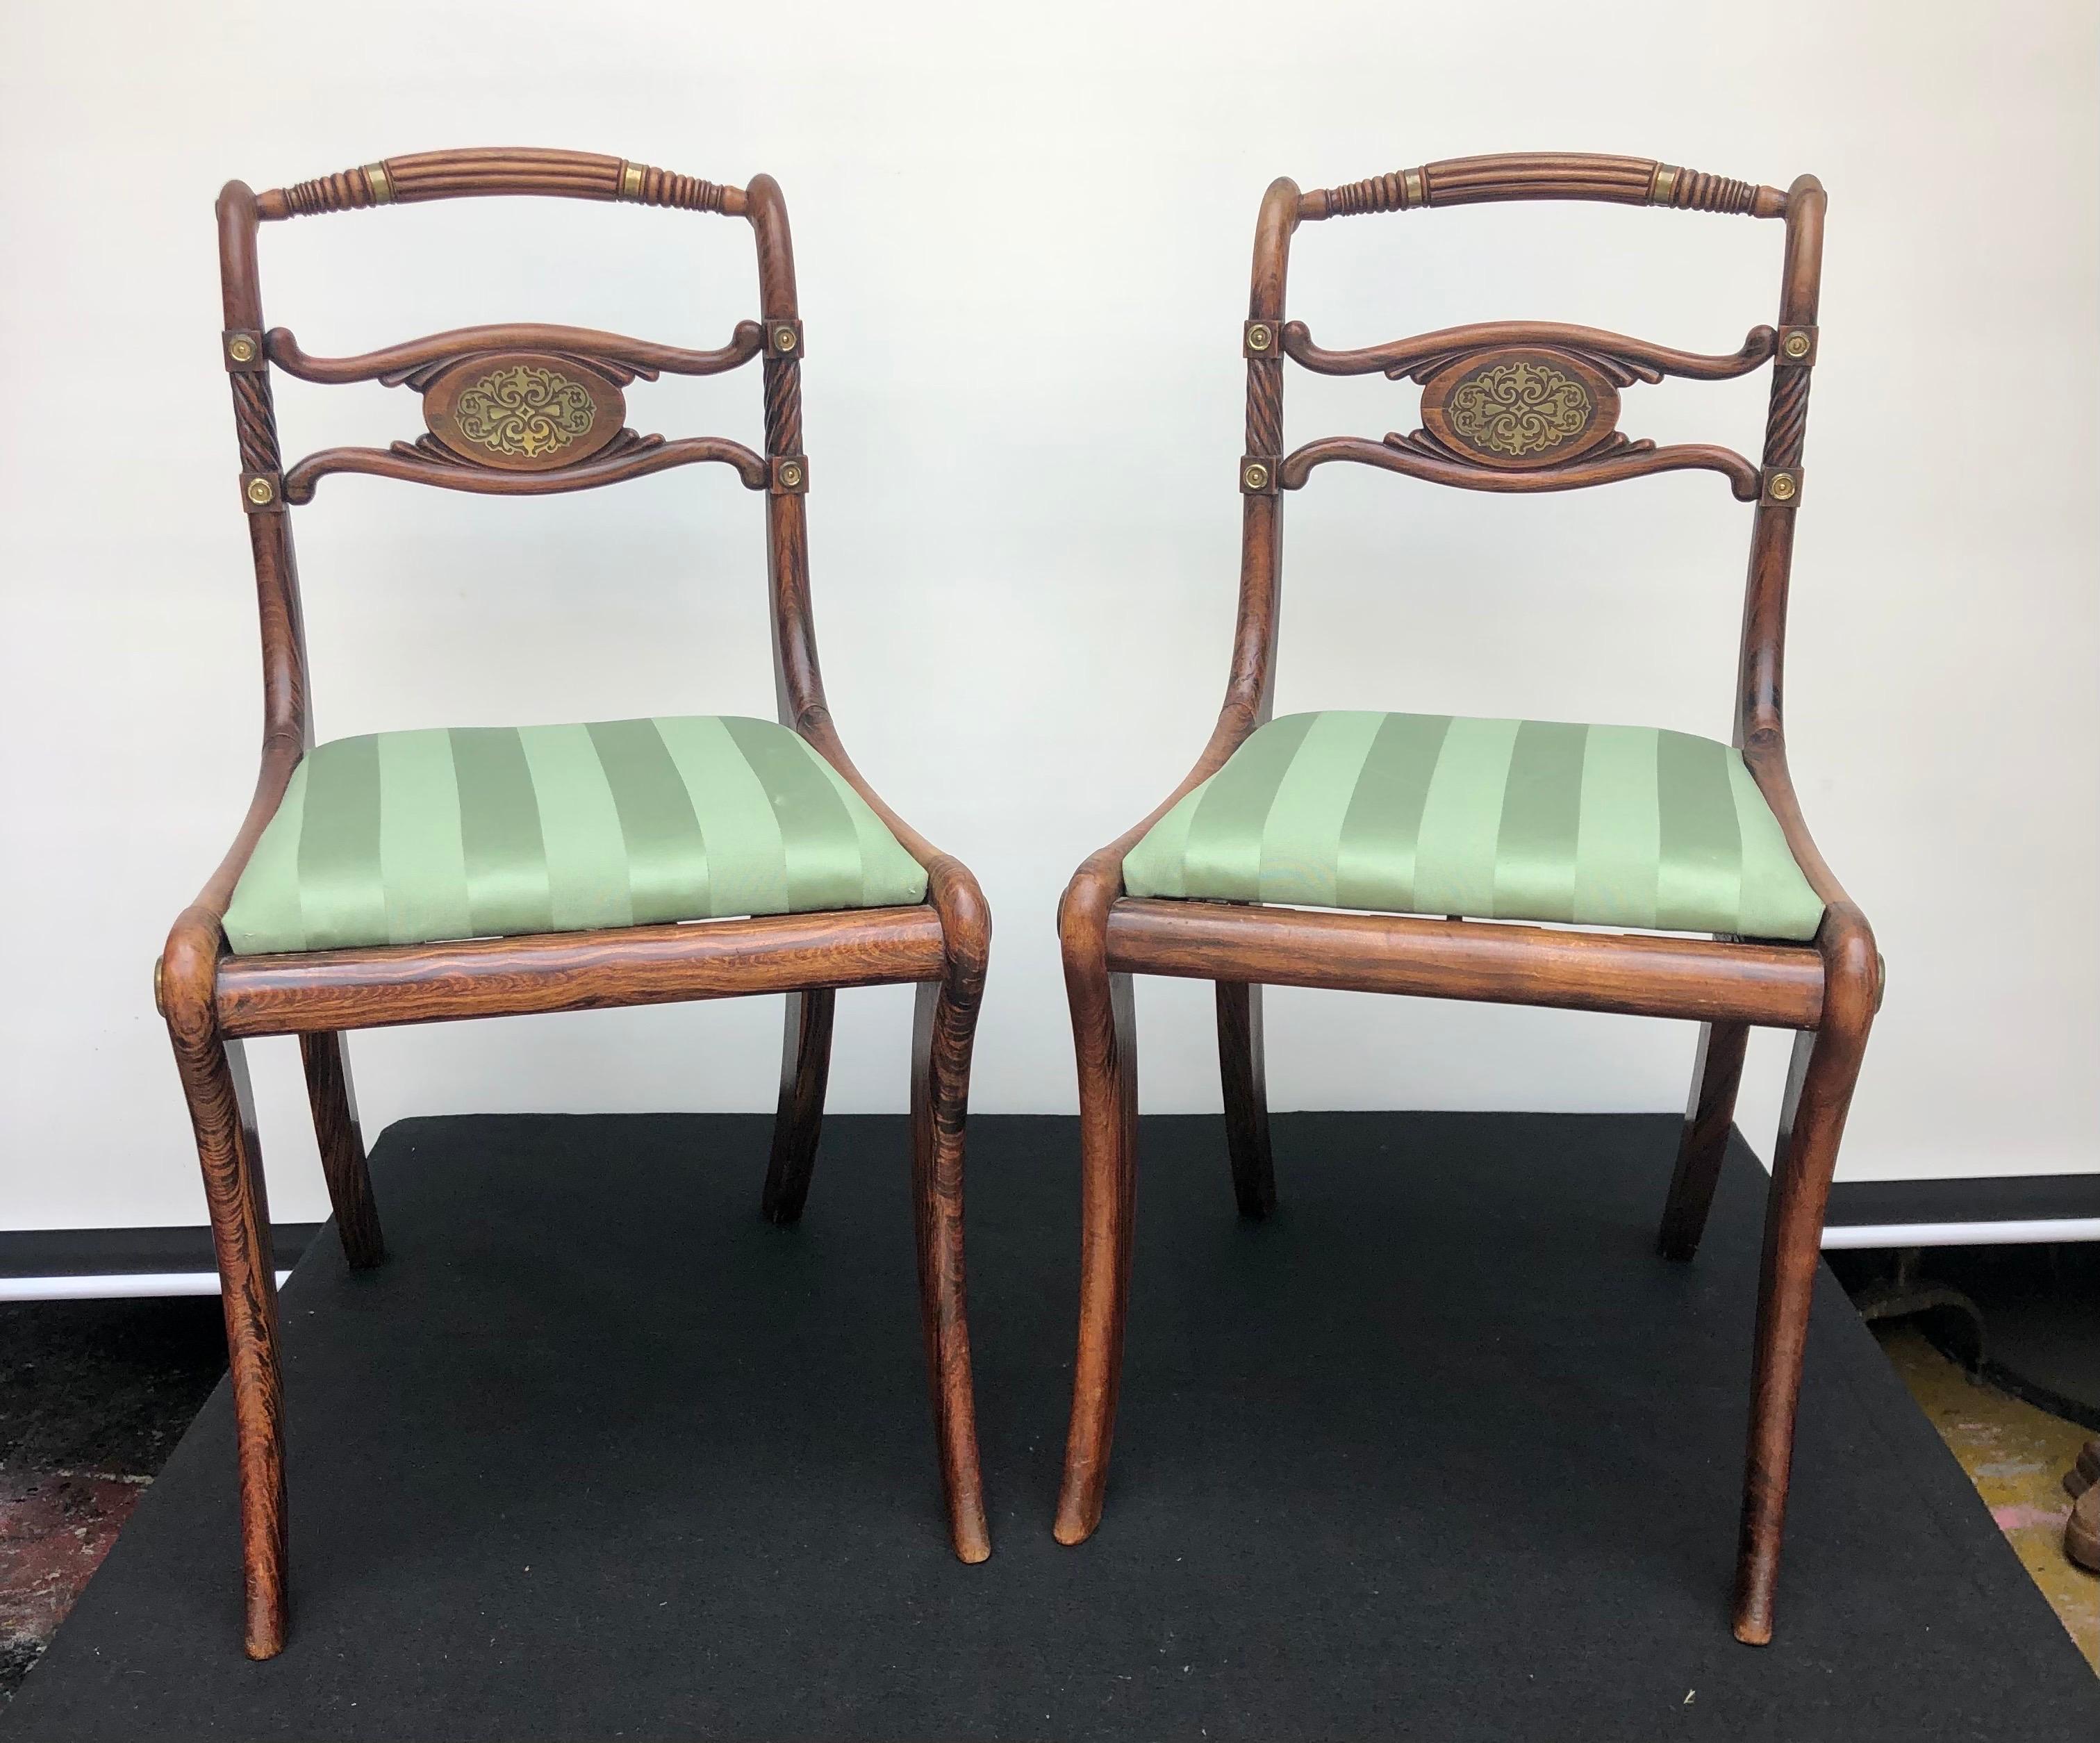 A Sophisticated pair of English Regency solid mahogany chairs with faux rosewood graining, brass inlay and brass mounts.